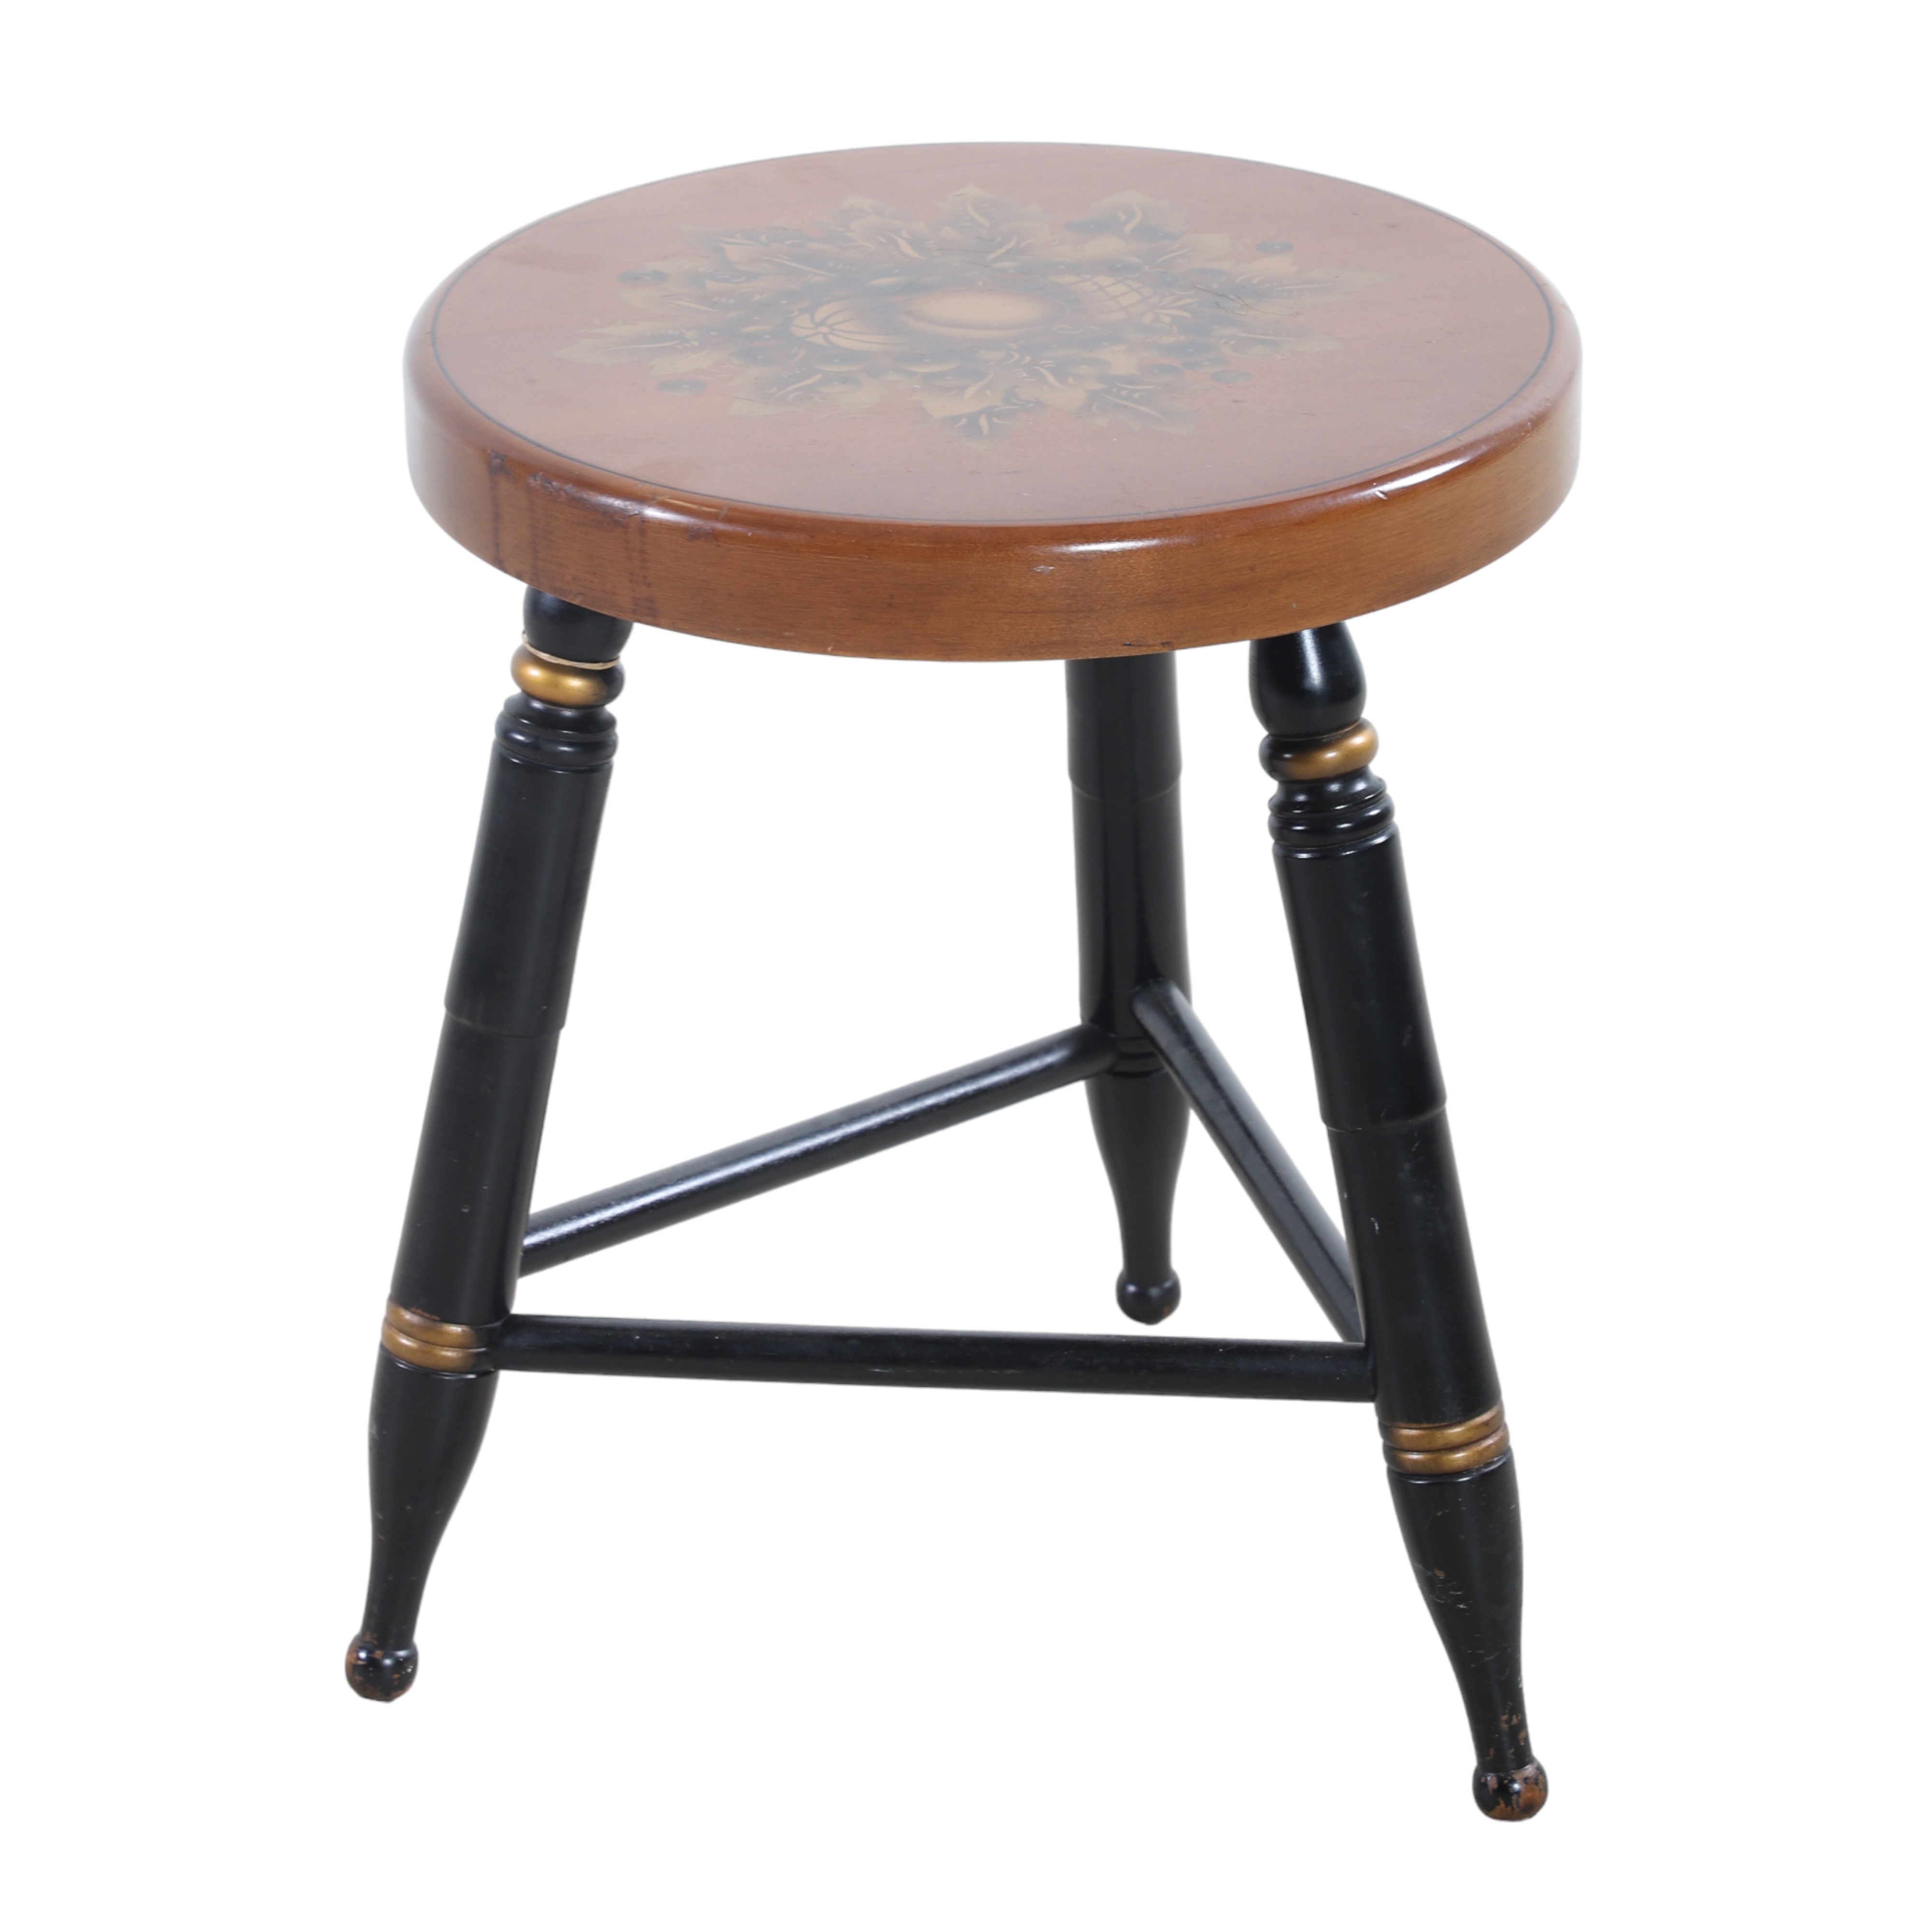 Hitchcock painted stool stenciled 3ca7be